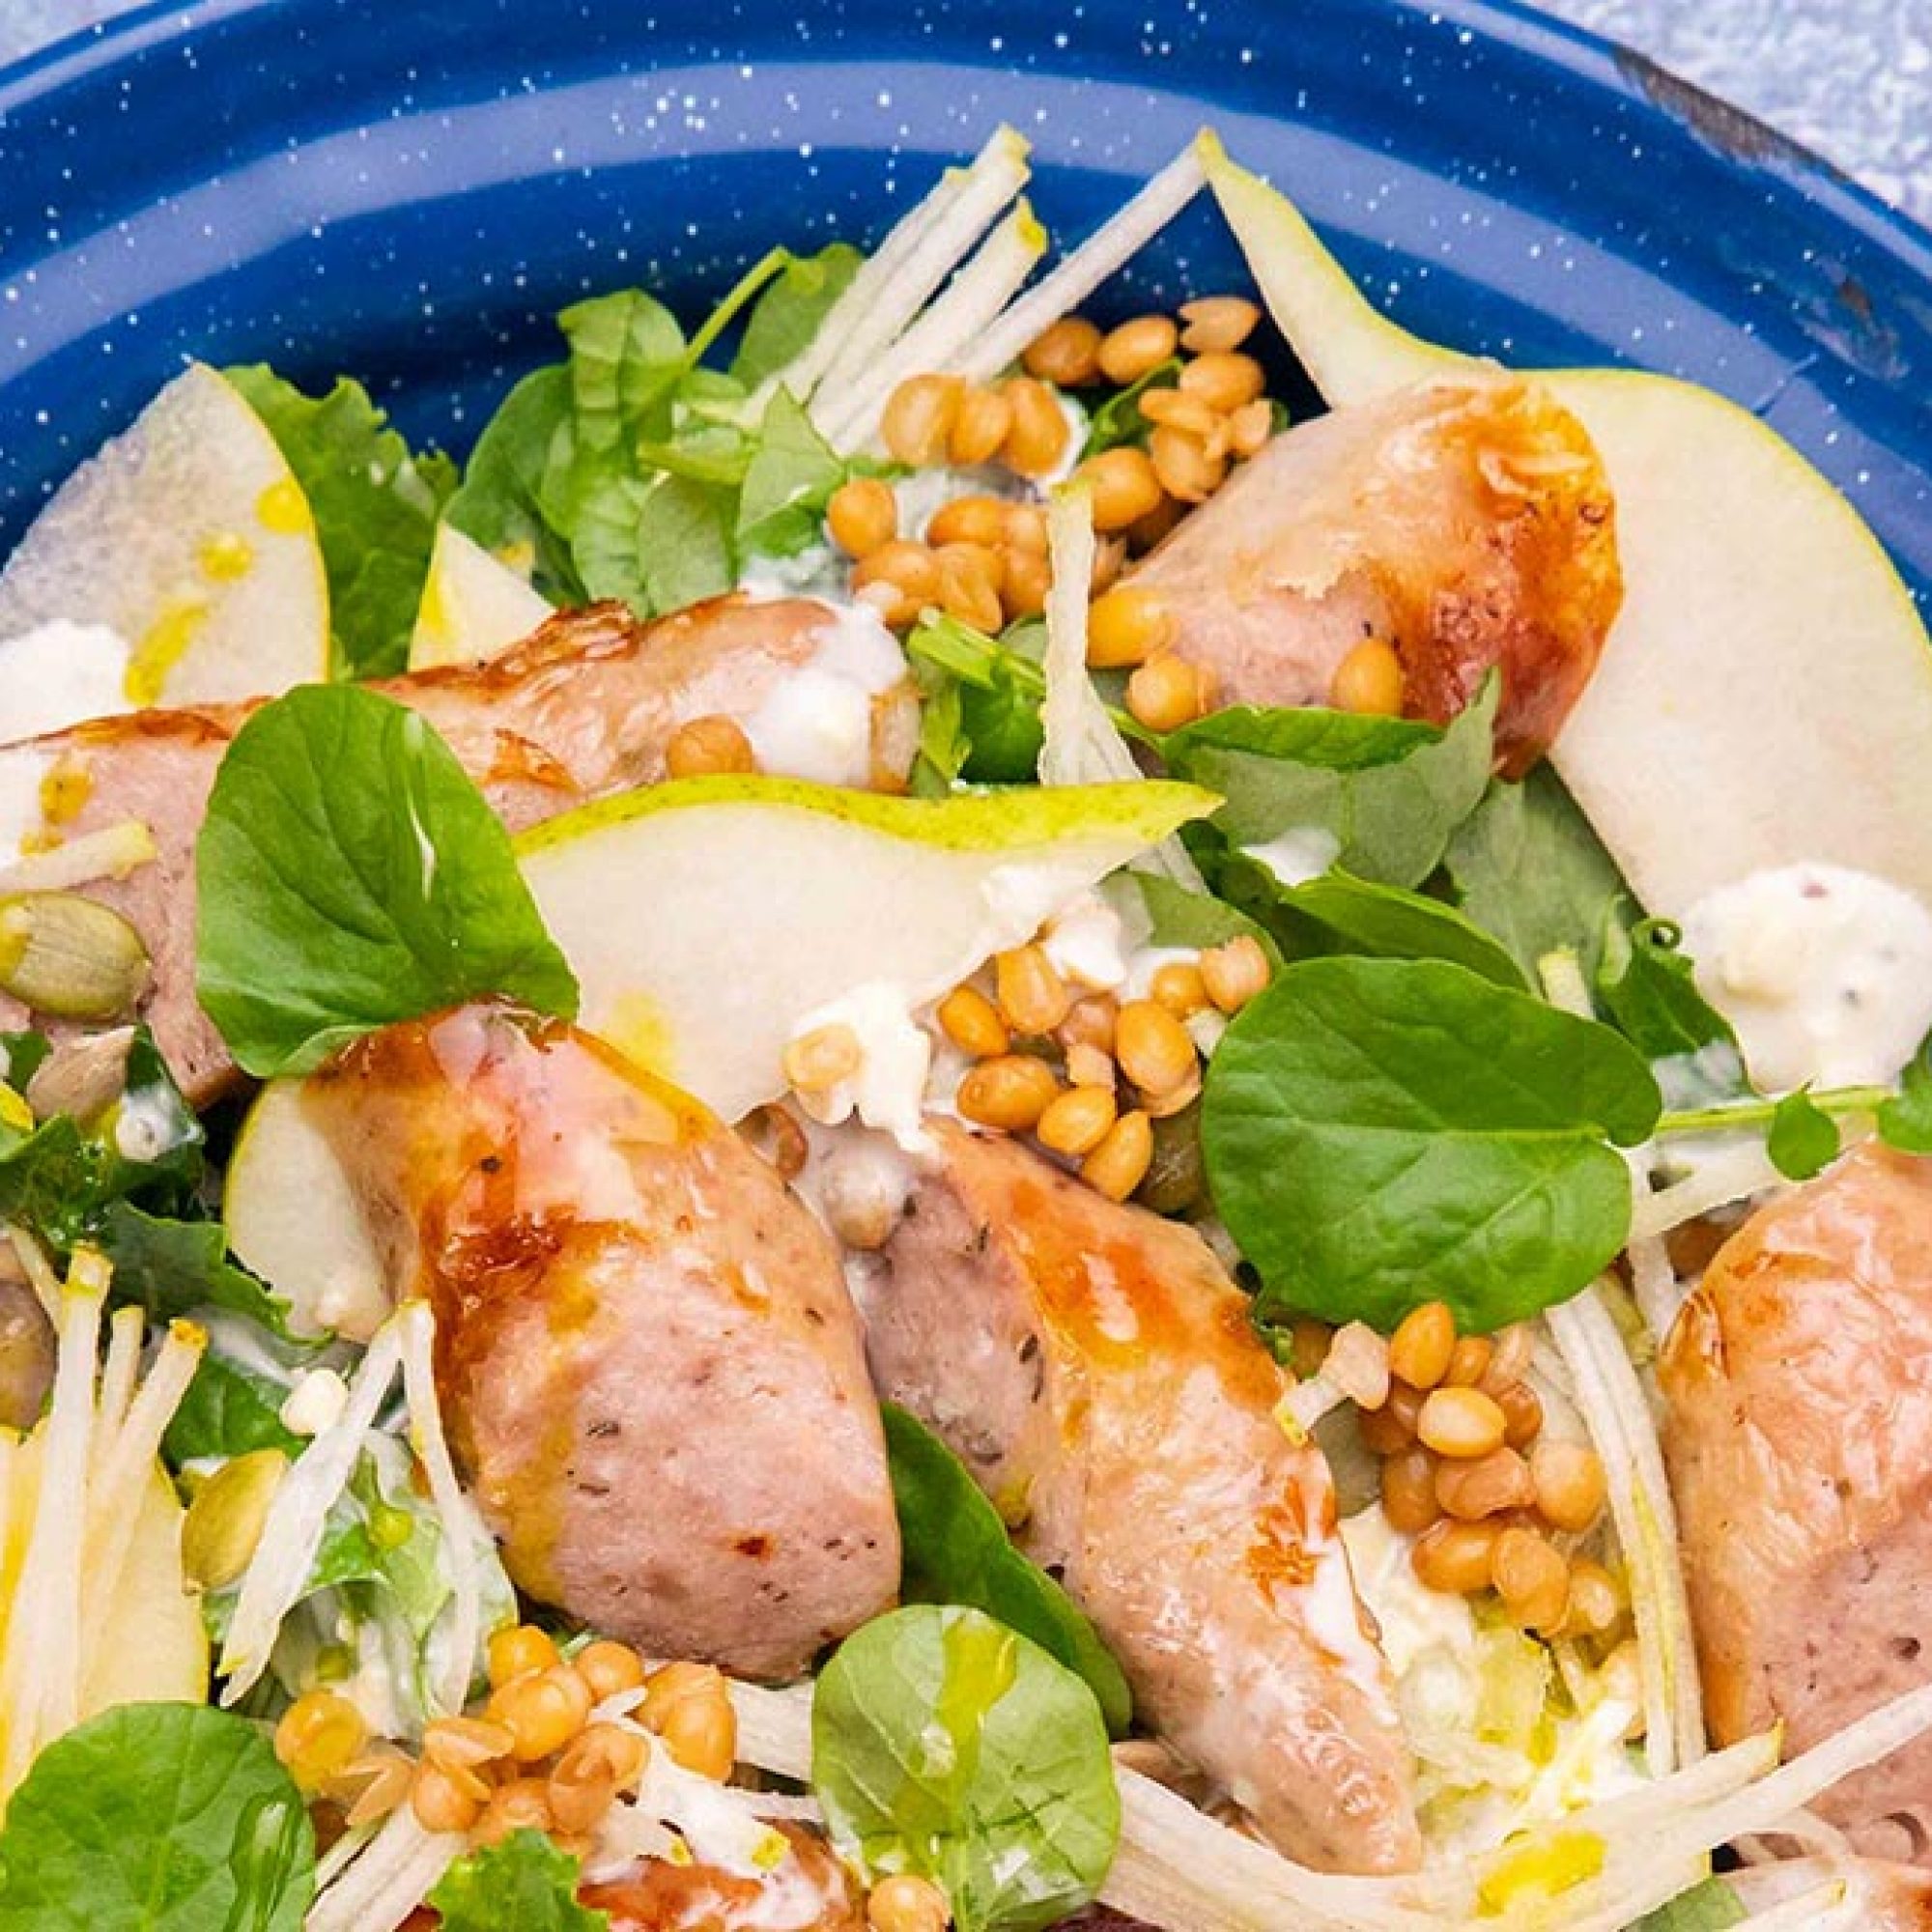 Sausage & Pear Salad with Blue Cheese Dressing Recipe